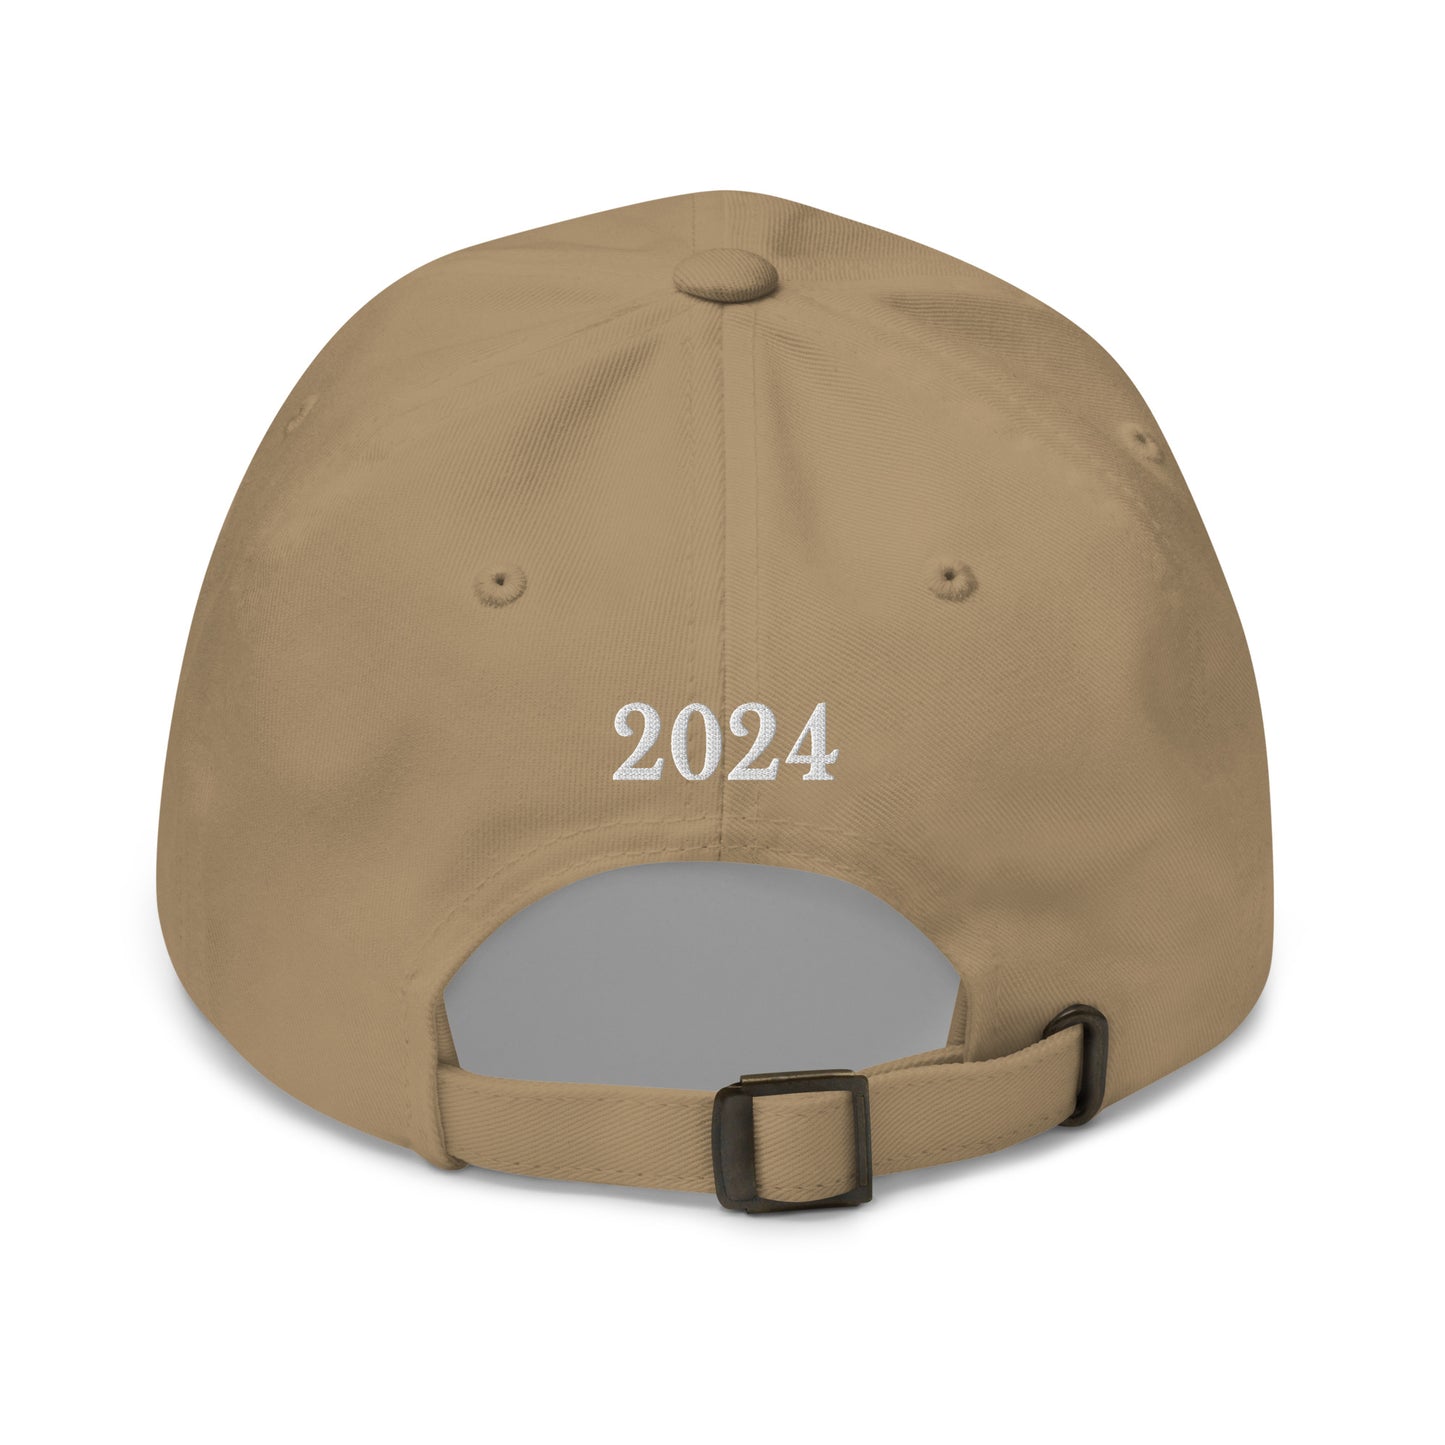 The Resolute Dad Hat